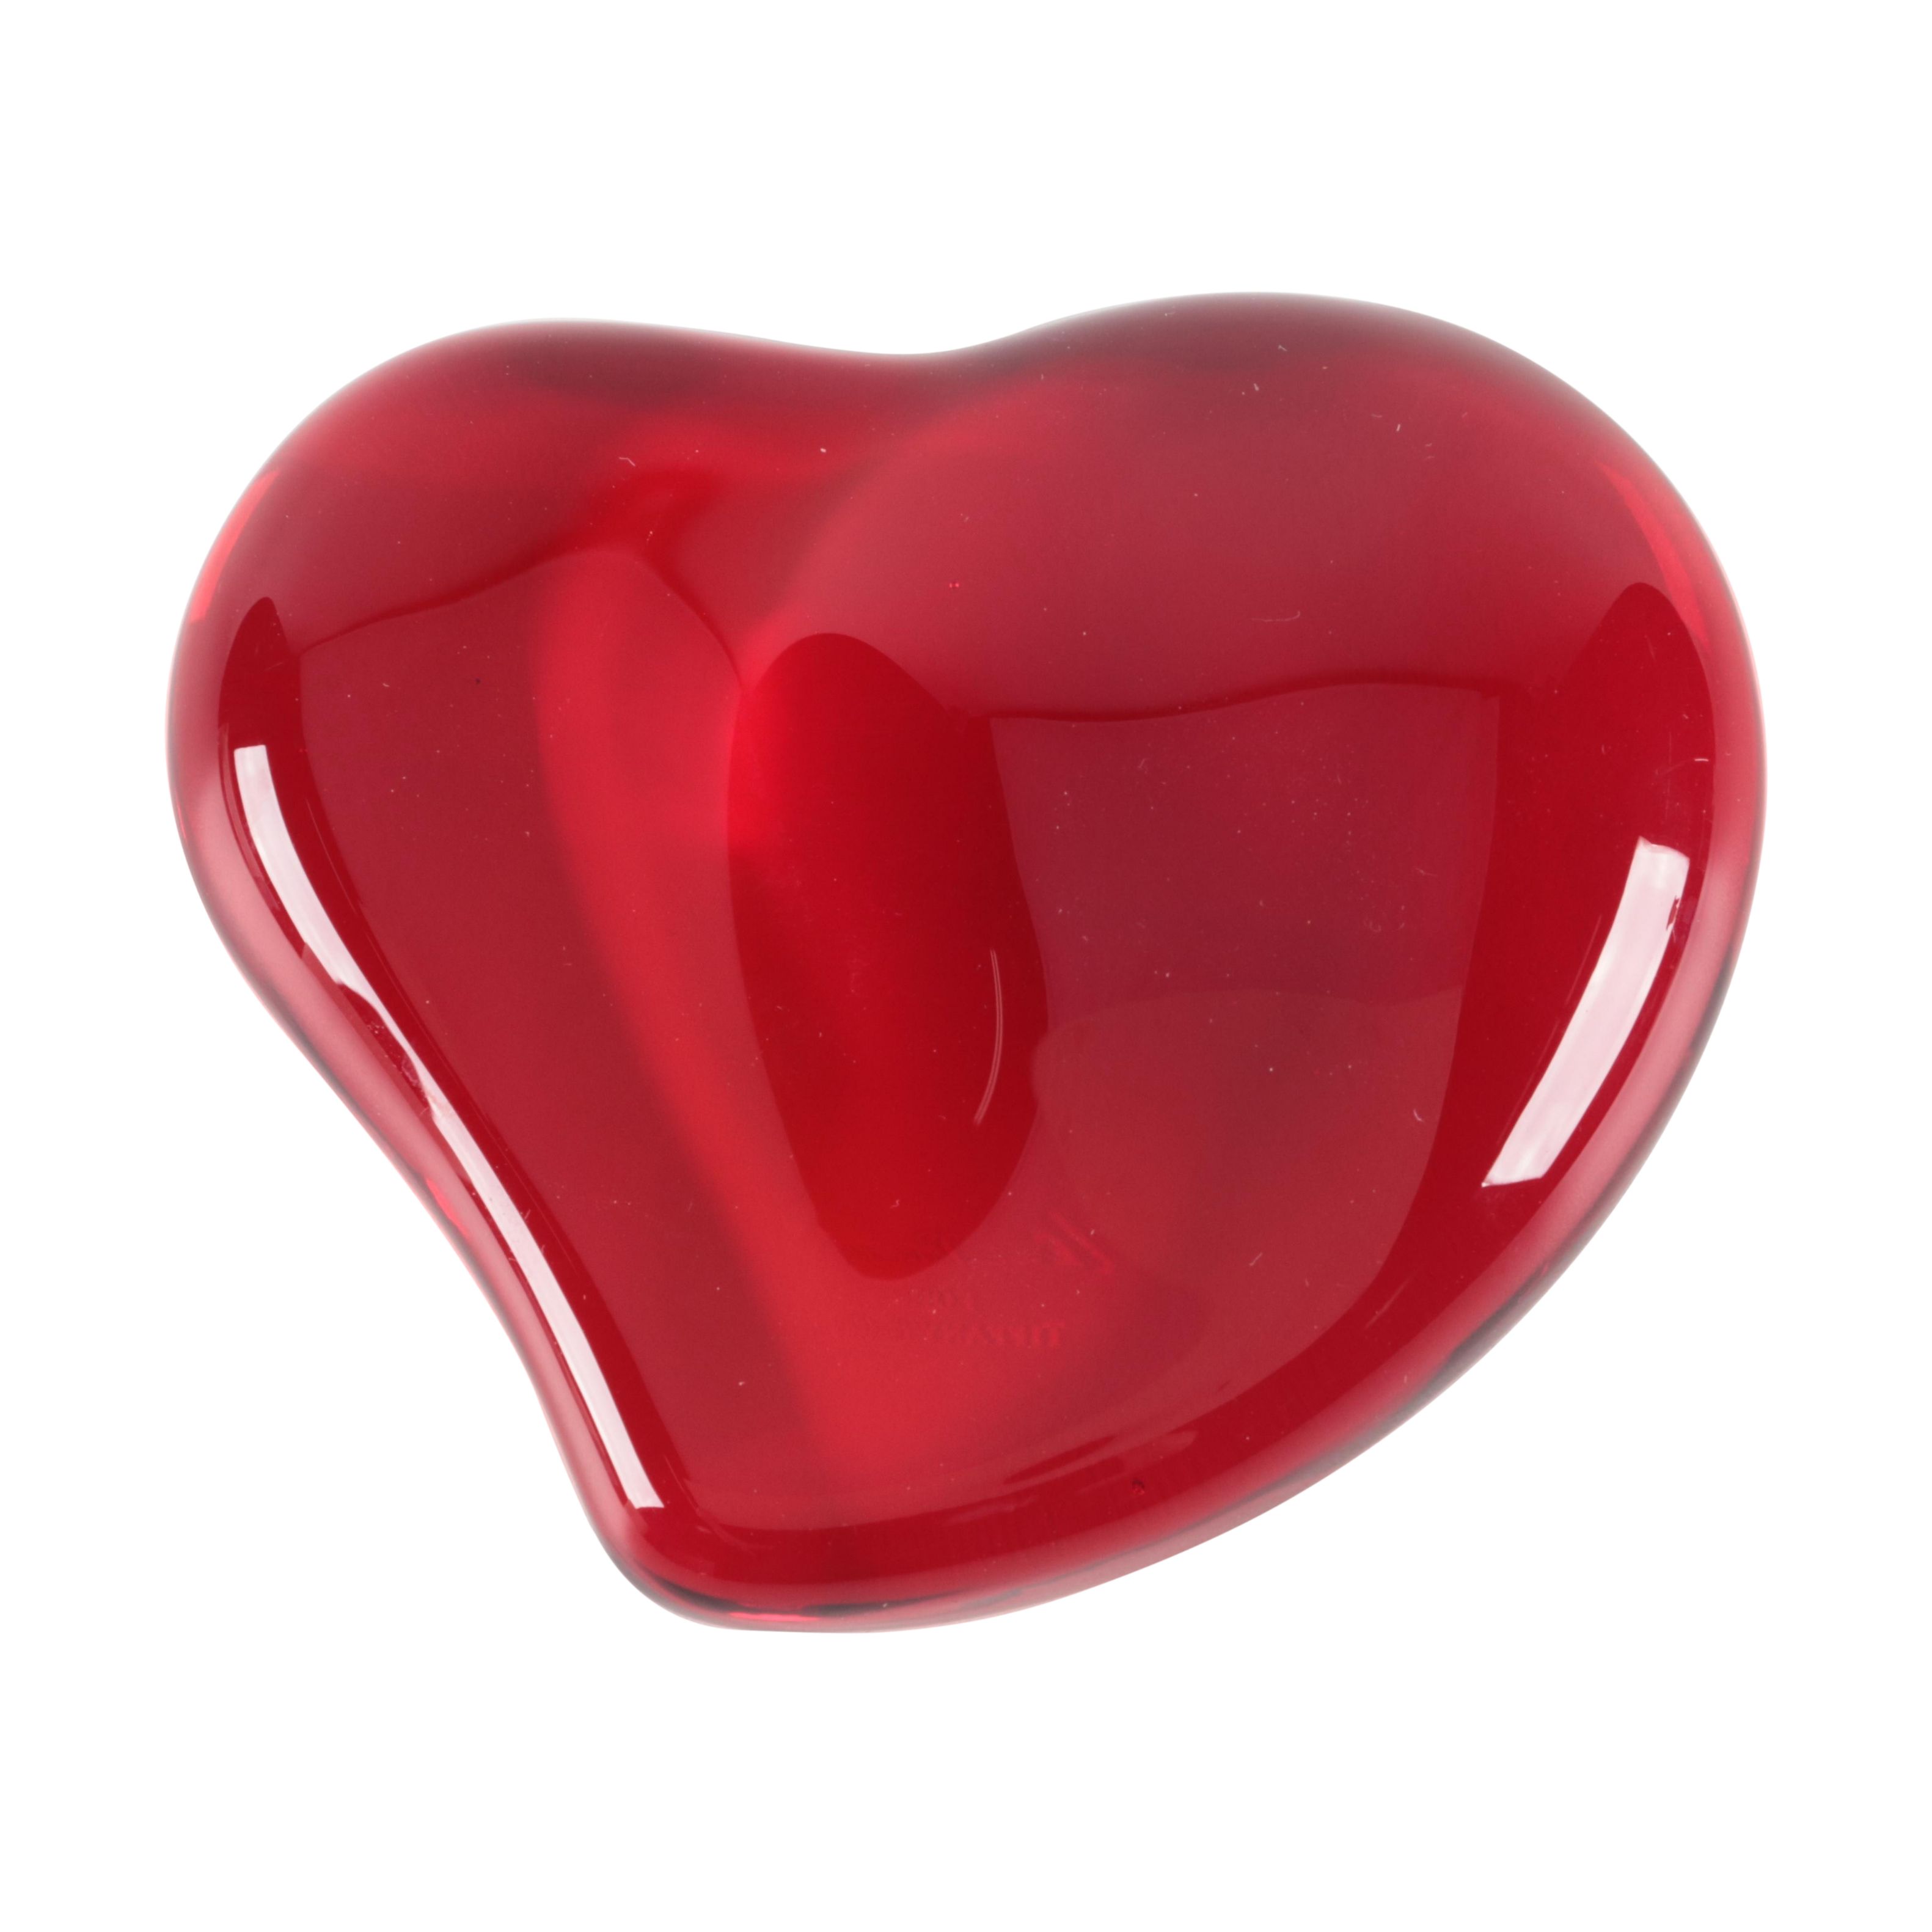 tiffany red heart paperweight